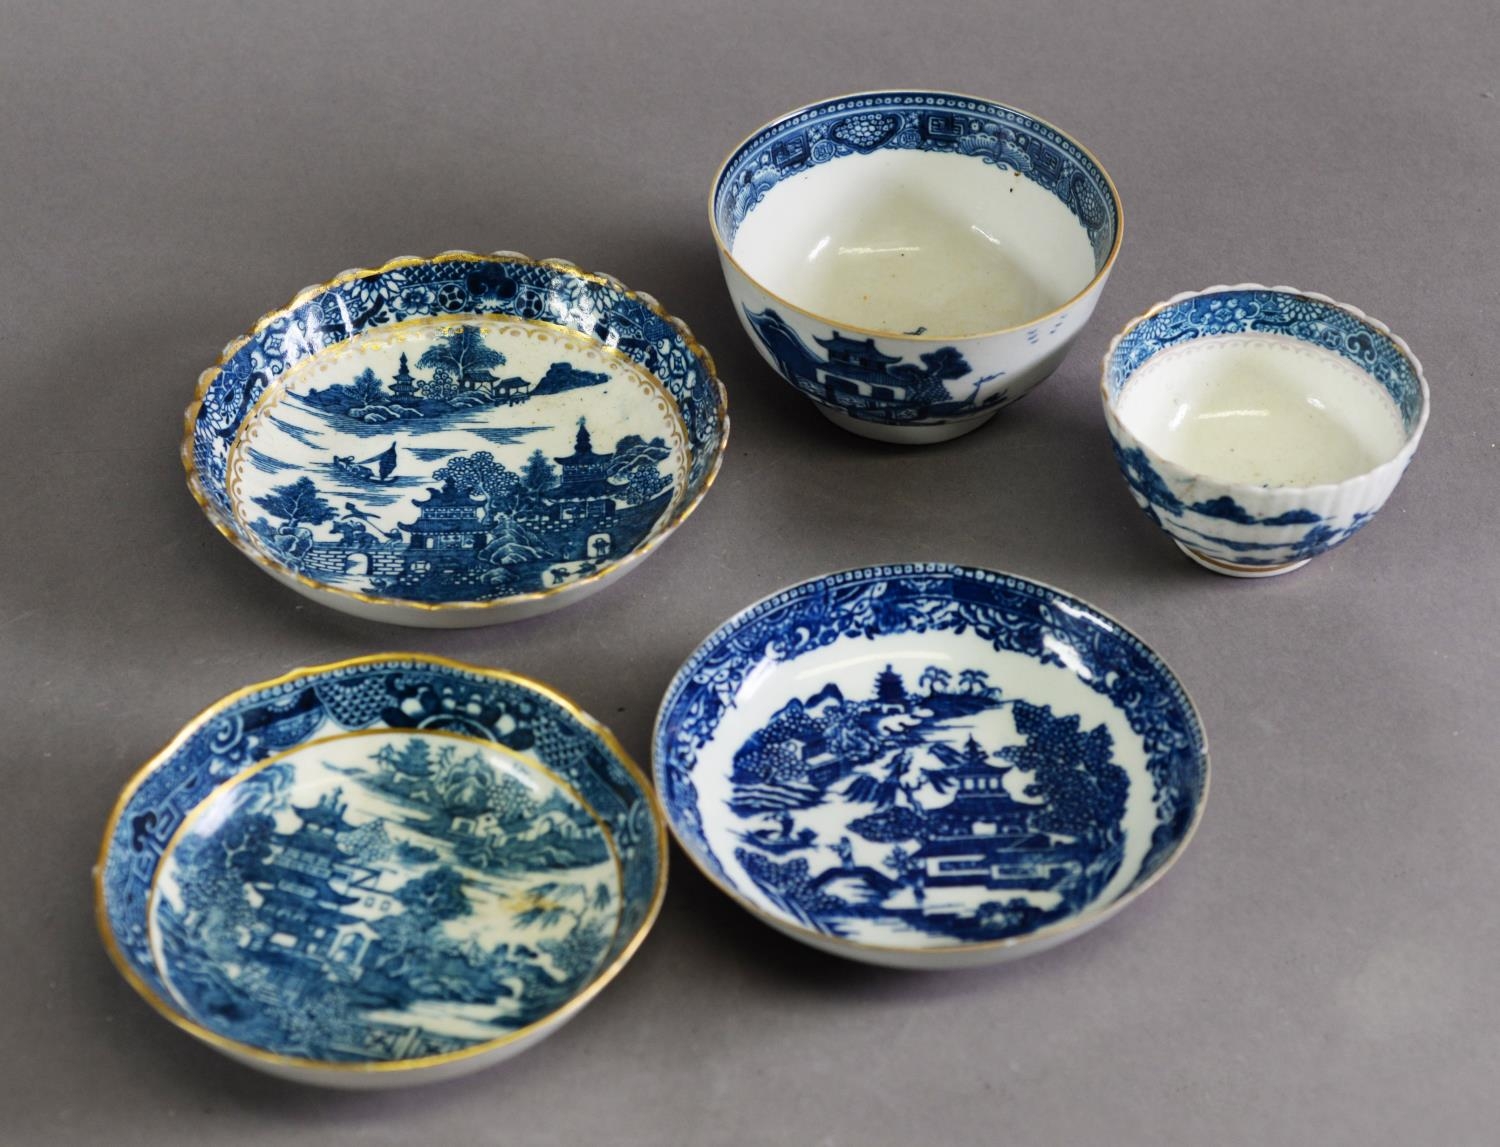 SMALL GROUP OF LATE 18TH CENTURY/EARLY 20TH CENTURY SOFT PASTE PORCELAIN TEA WARES, comprising large